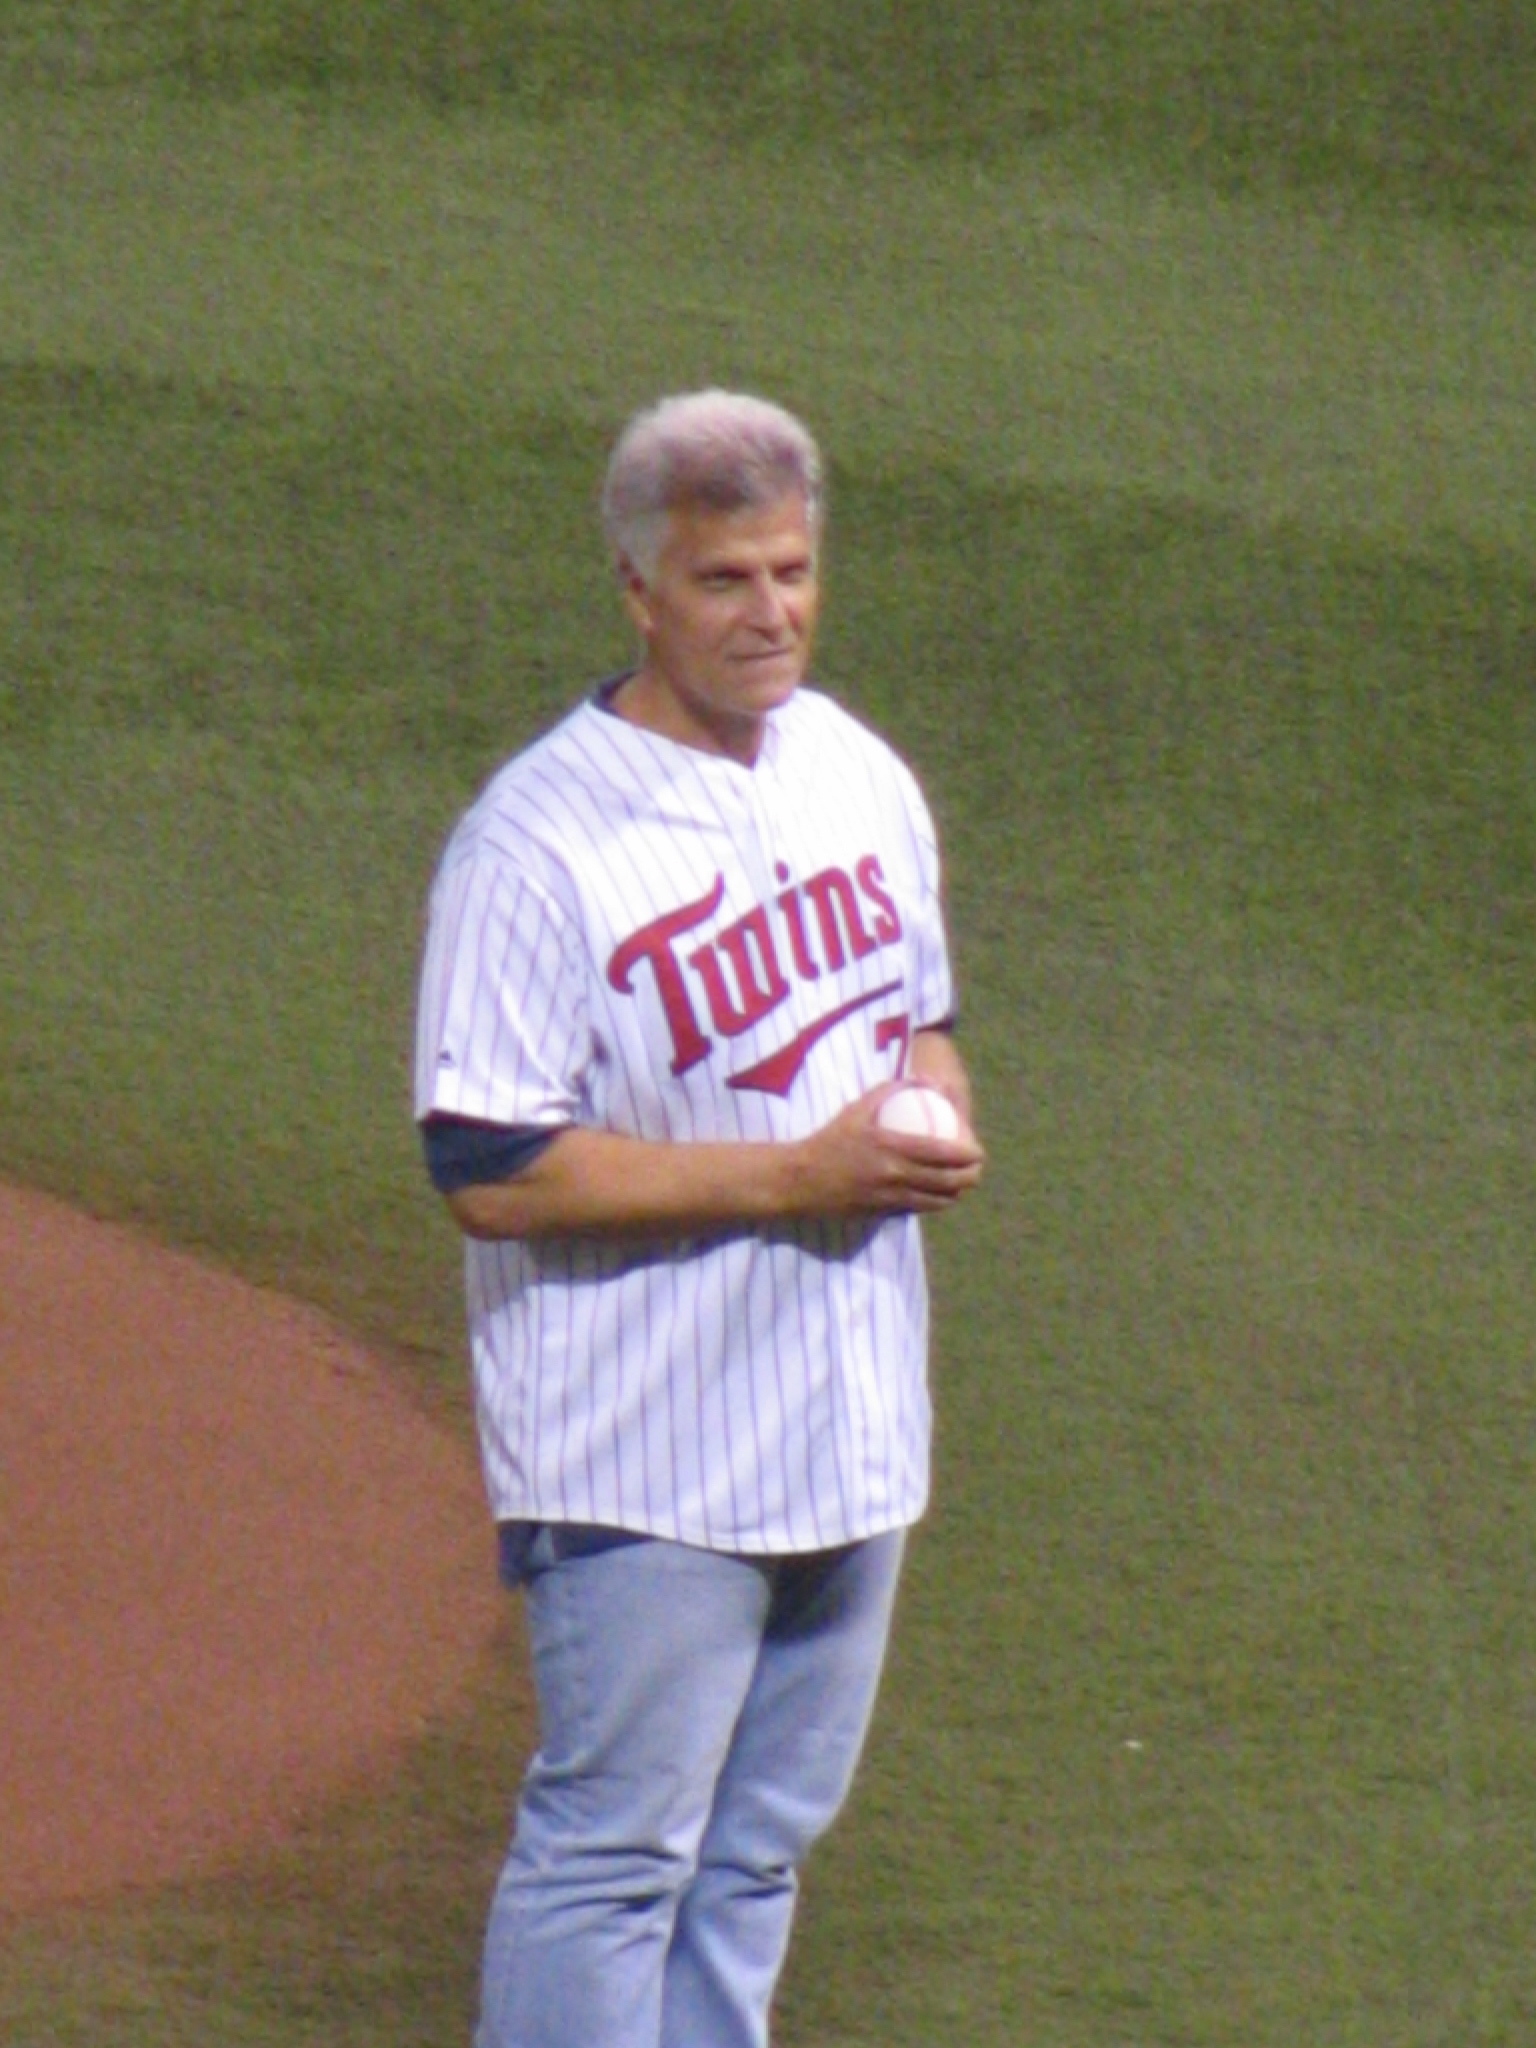 a man is holding a ball on the field